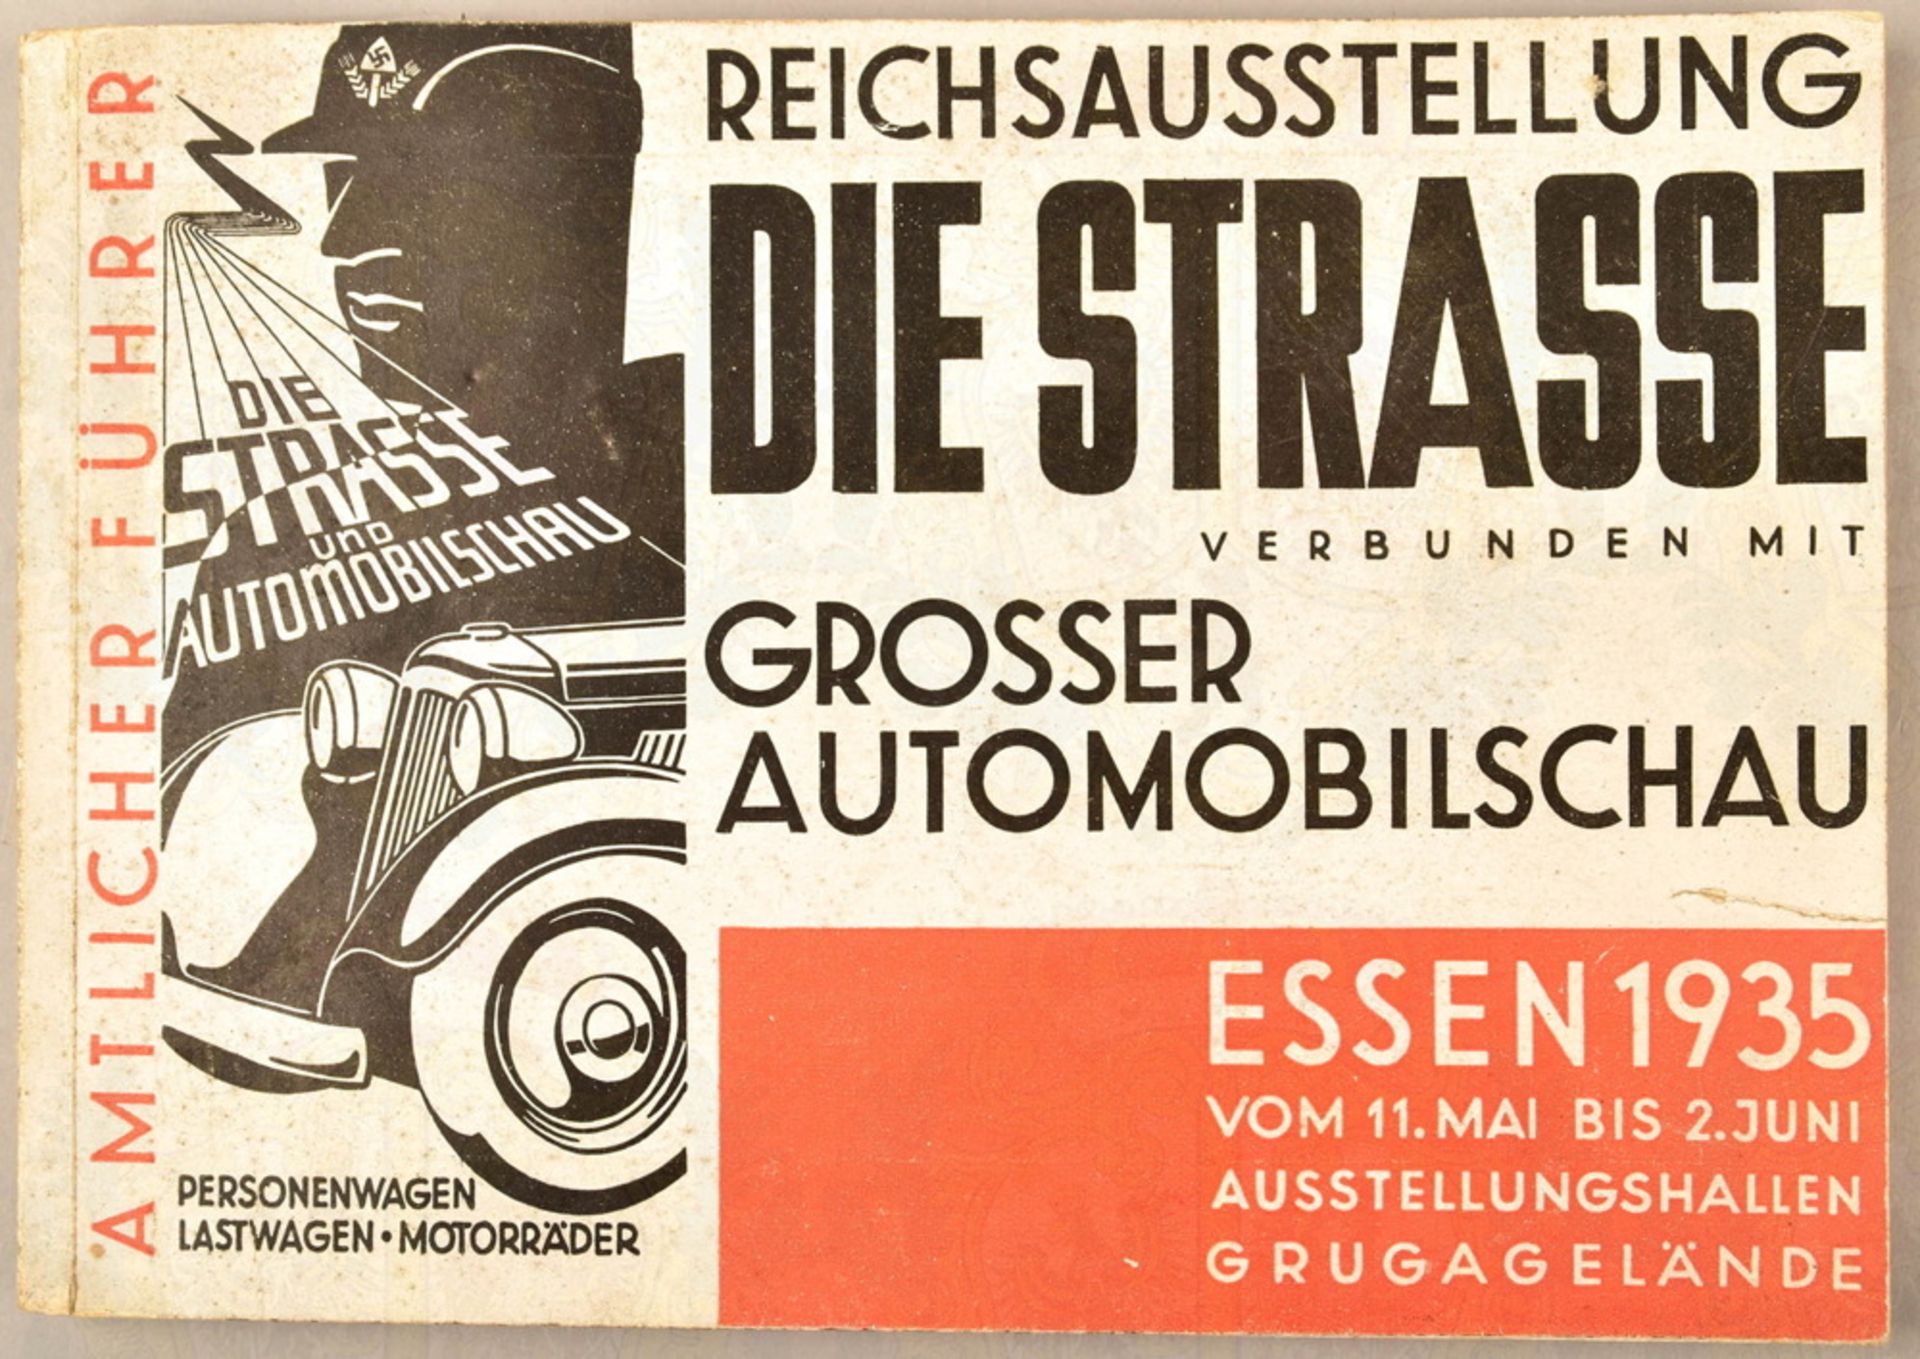 Official guide for the German Reich road exhibition 1935 - Image 2 of 4